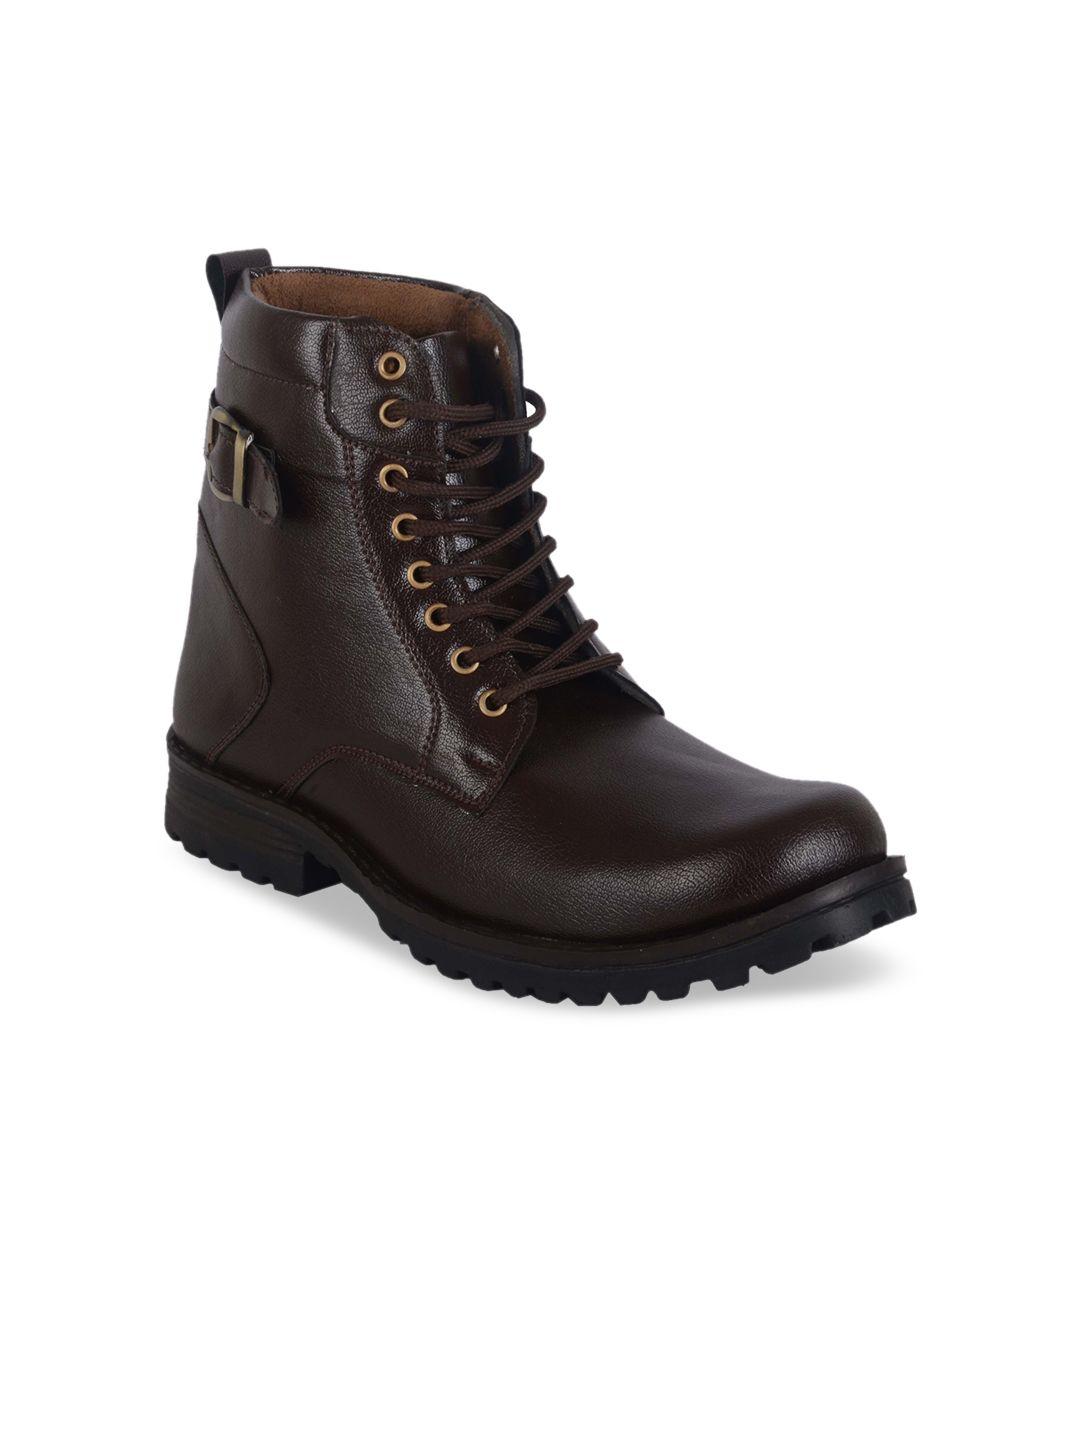 woakers men textured mid-top lace-ups boots